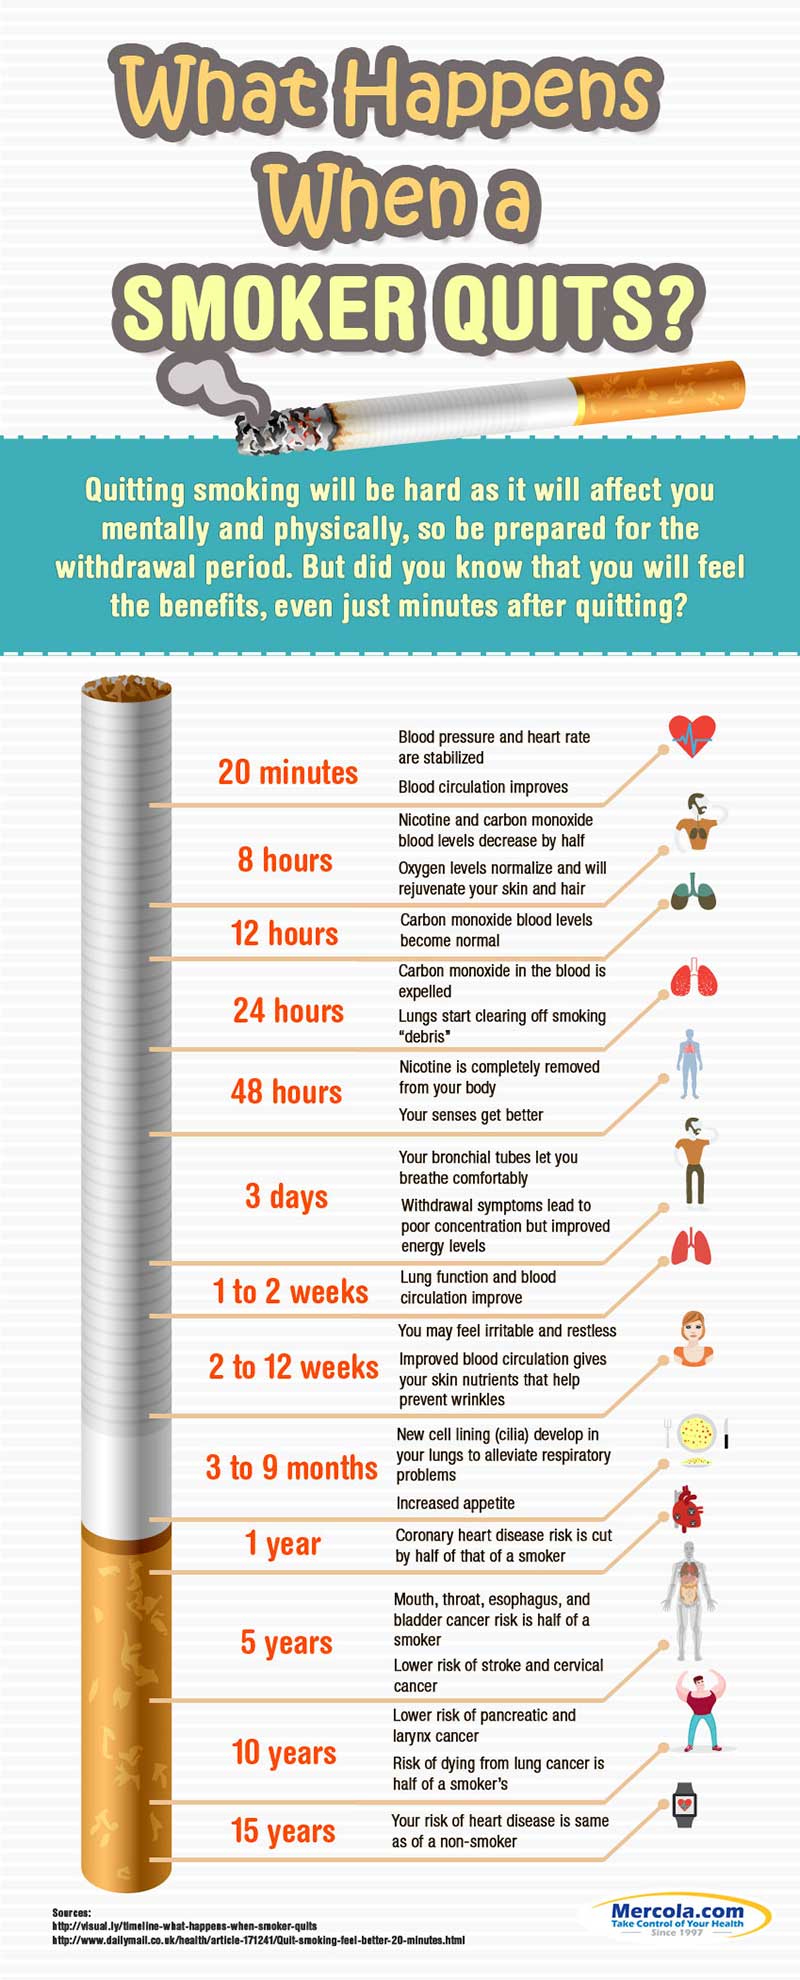 What Happens When a Smoker Quits Infographic